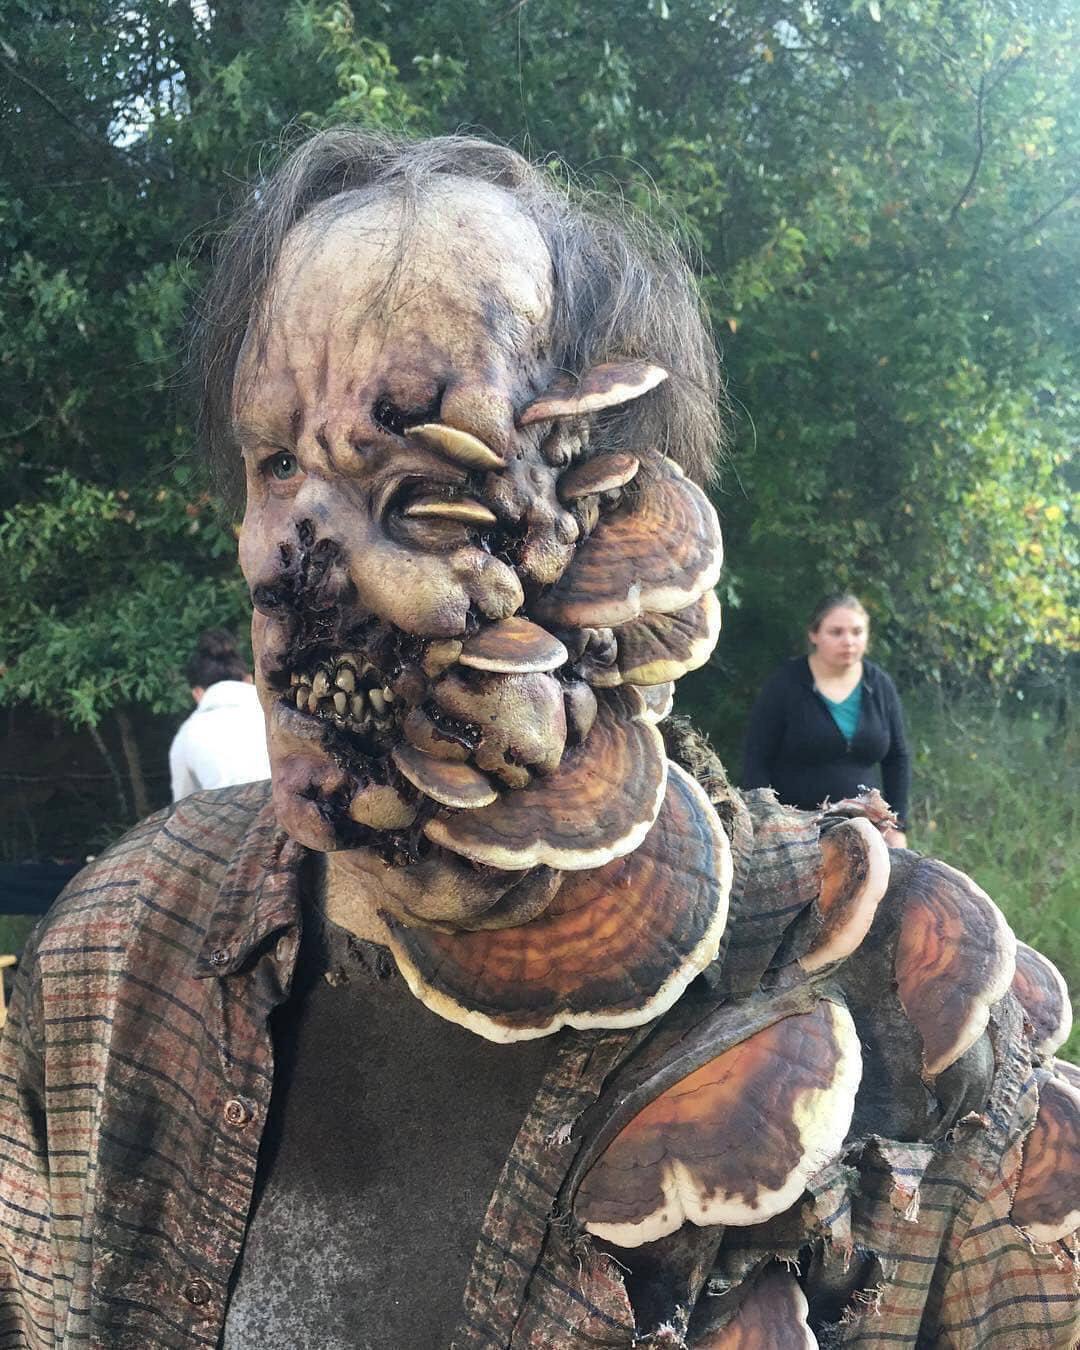 Special effects makeup is really fun[gi]. 